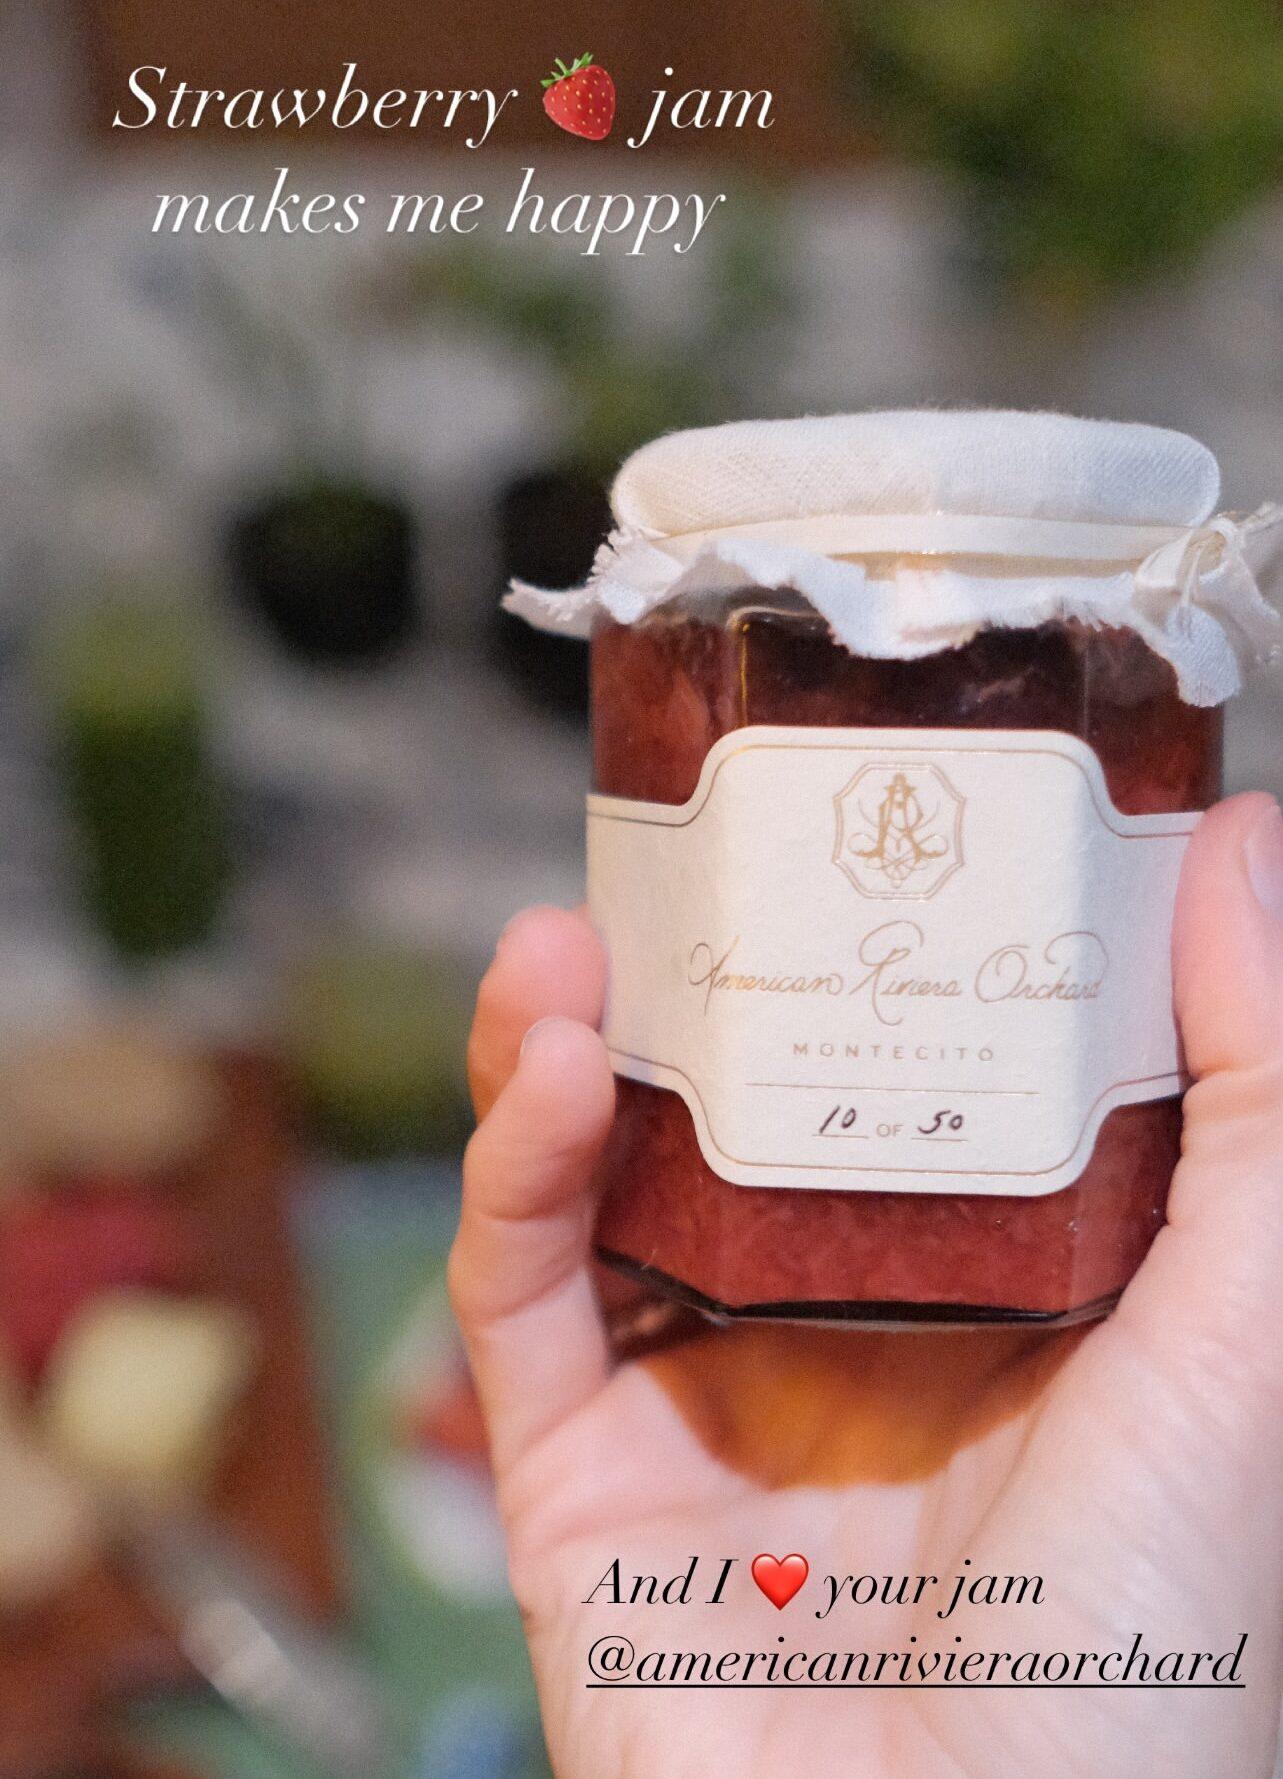 Meghan Markle Gives Out First Set Of Her American Riviera Orchard Jam To Her Influencer Friends